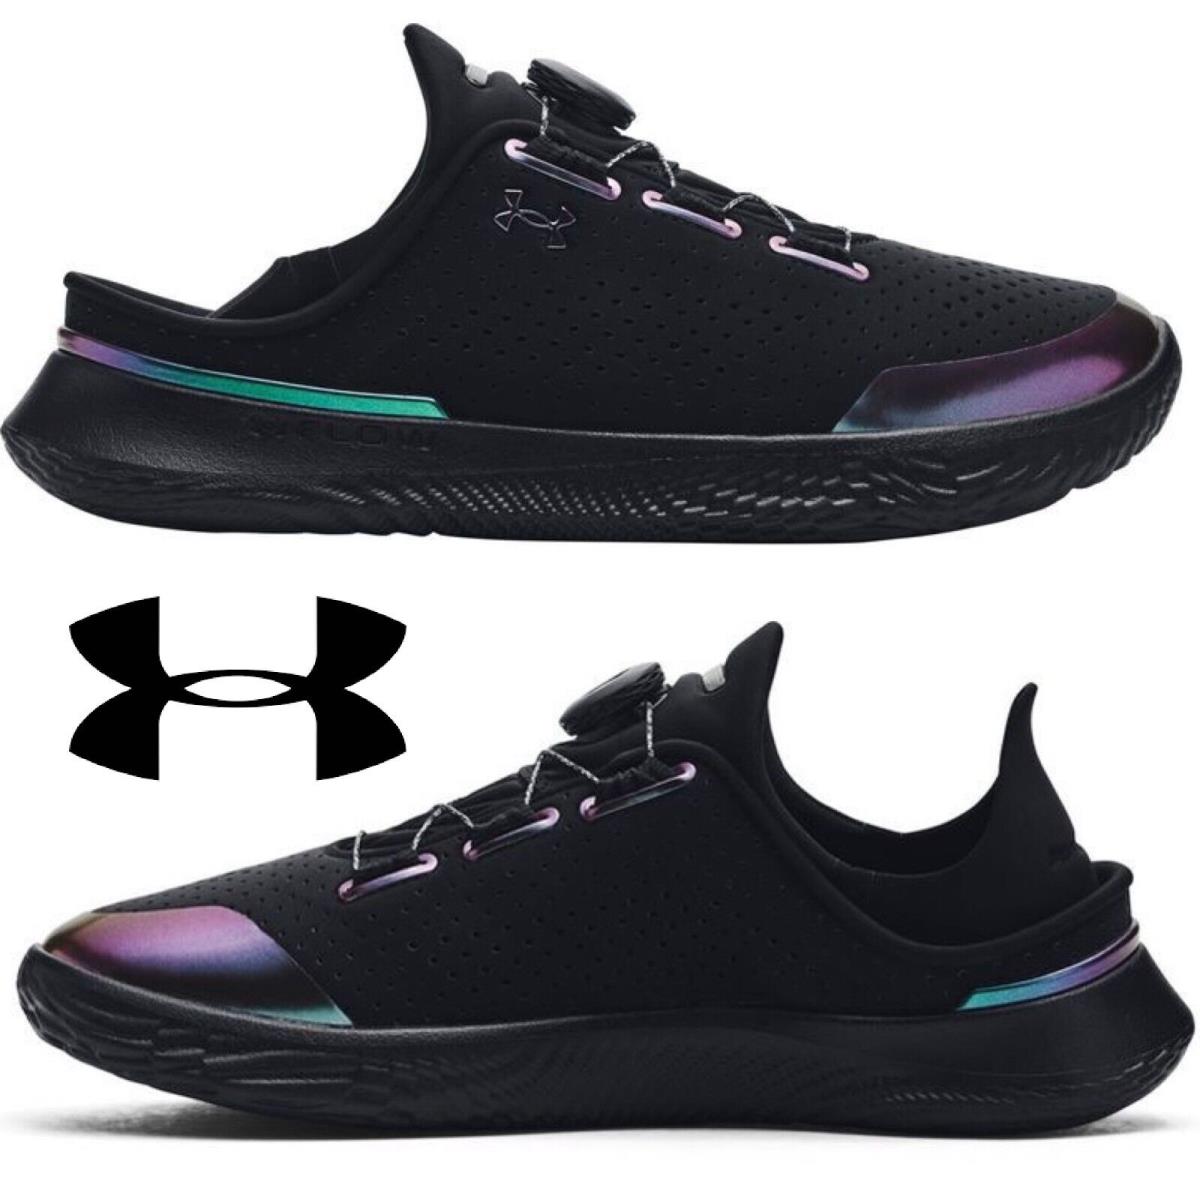 Under Armour Slipspeed Training Shoes Men`s Sneakers Running Casual Sport Black